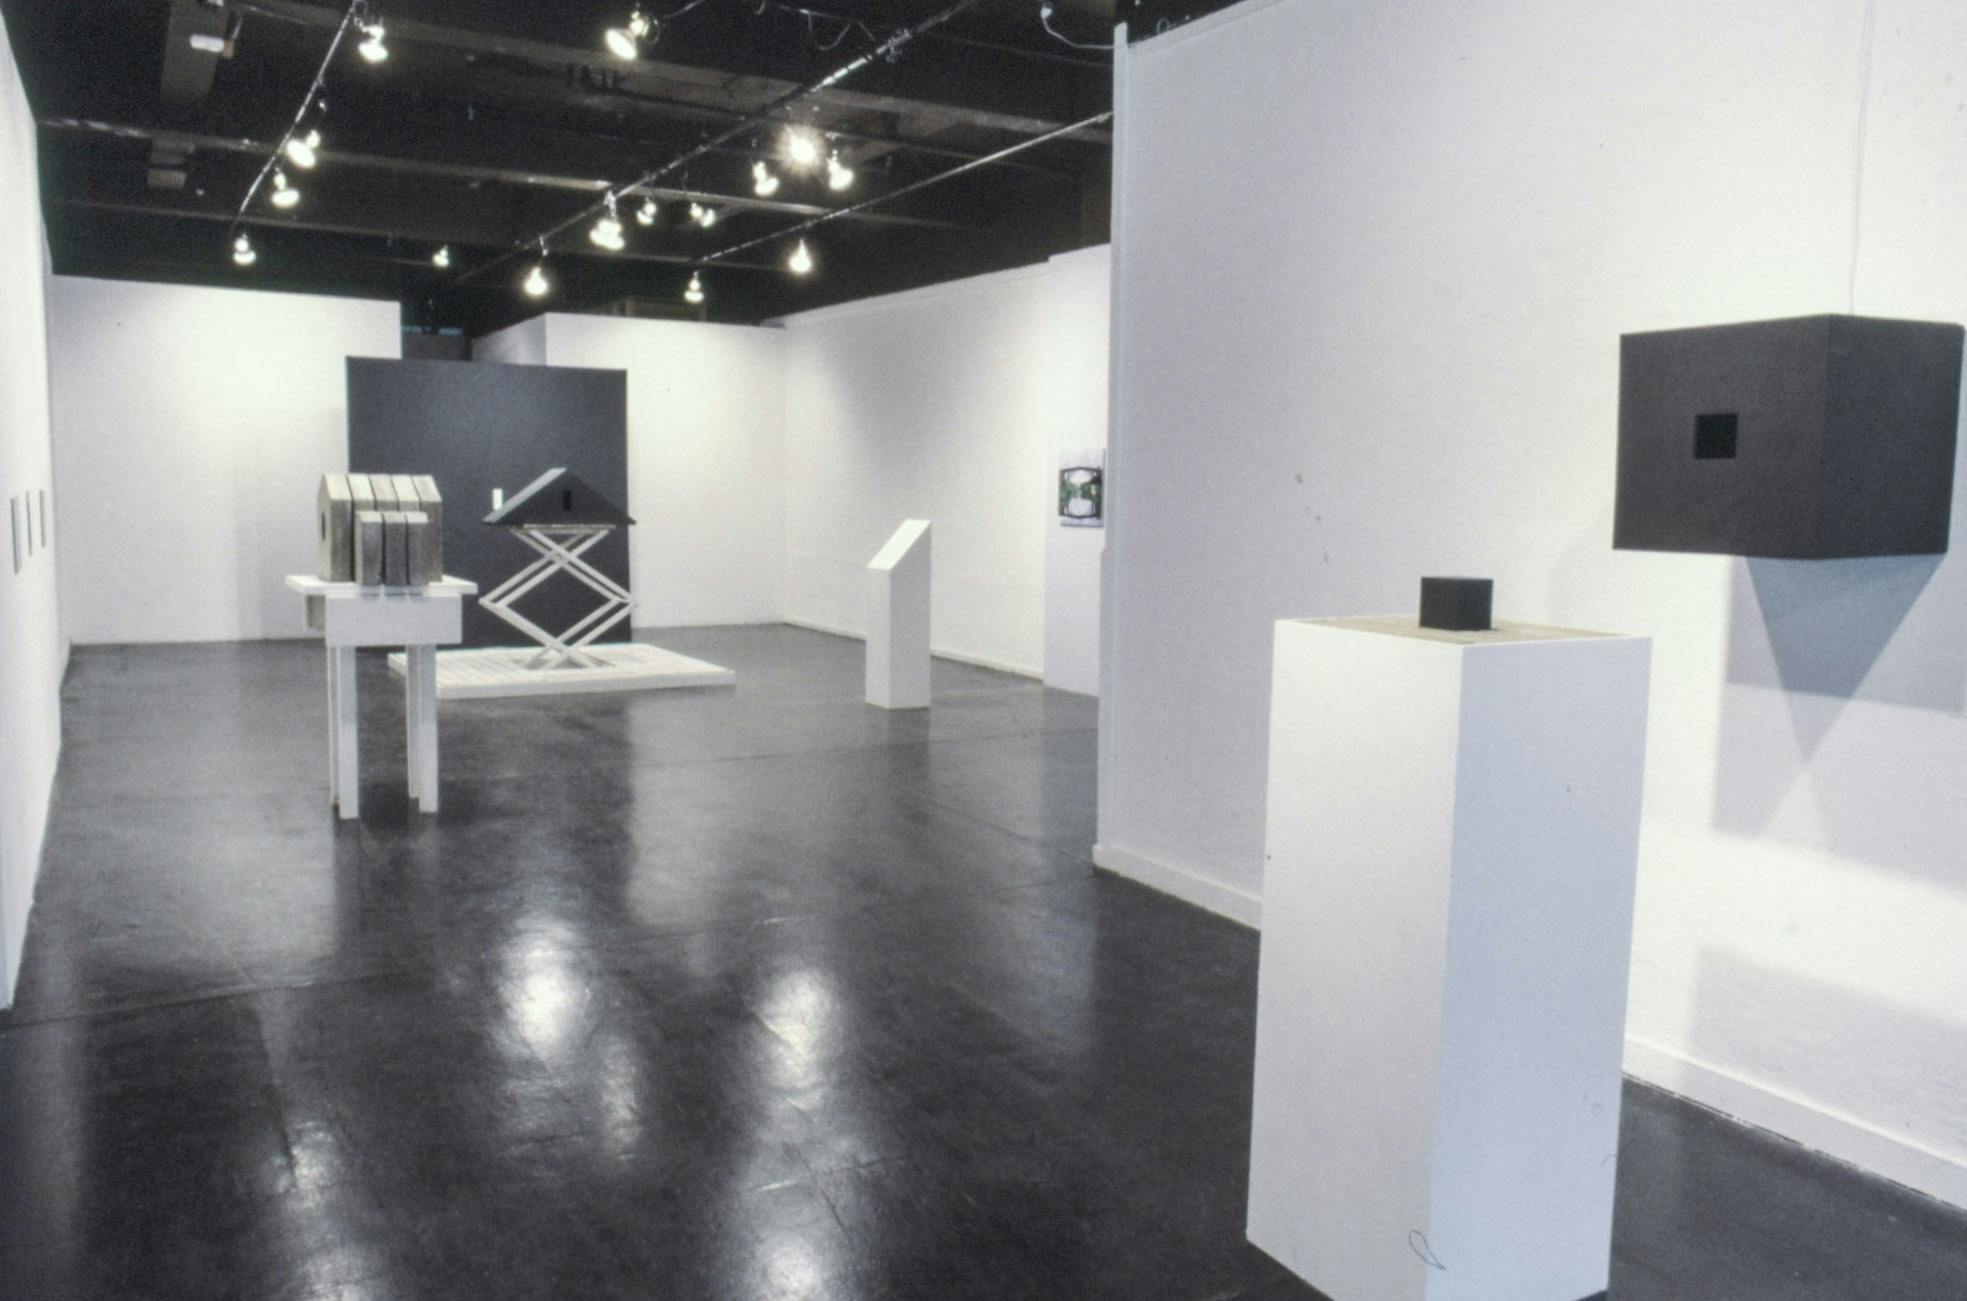 Several sculptures and small paintings in a gallery space. The sculptures are black and concrete, and are on several different white surfaces including a plinth, a side table, and a scissor lift.